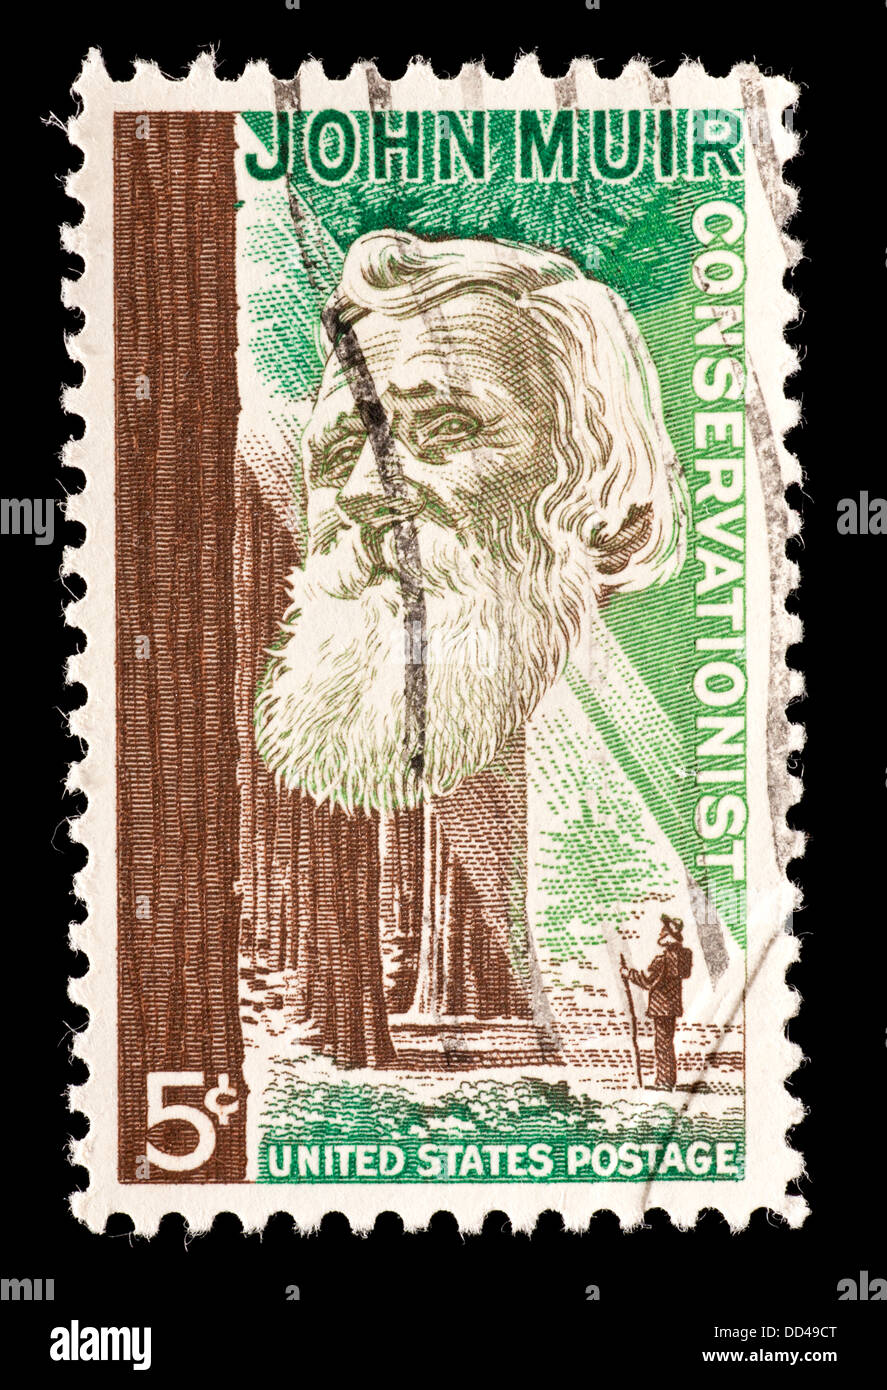 Postage stamp from the United States depicting John Muir and redwoods. Stock Photo